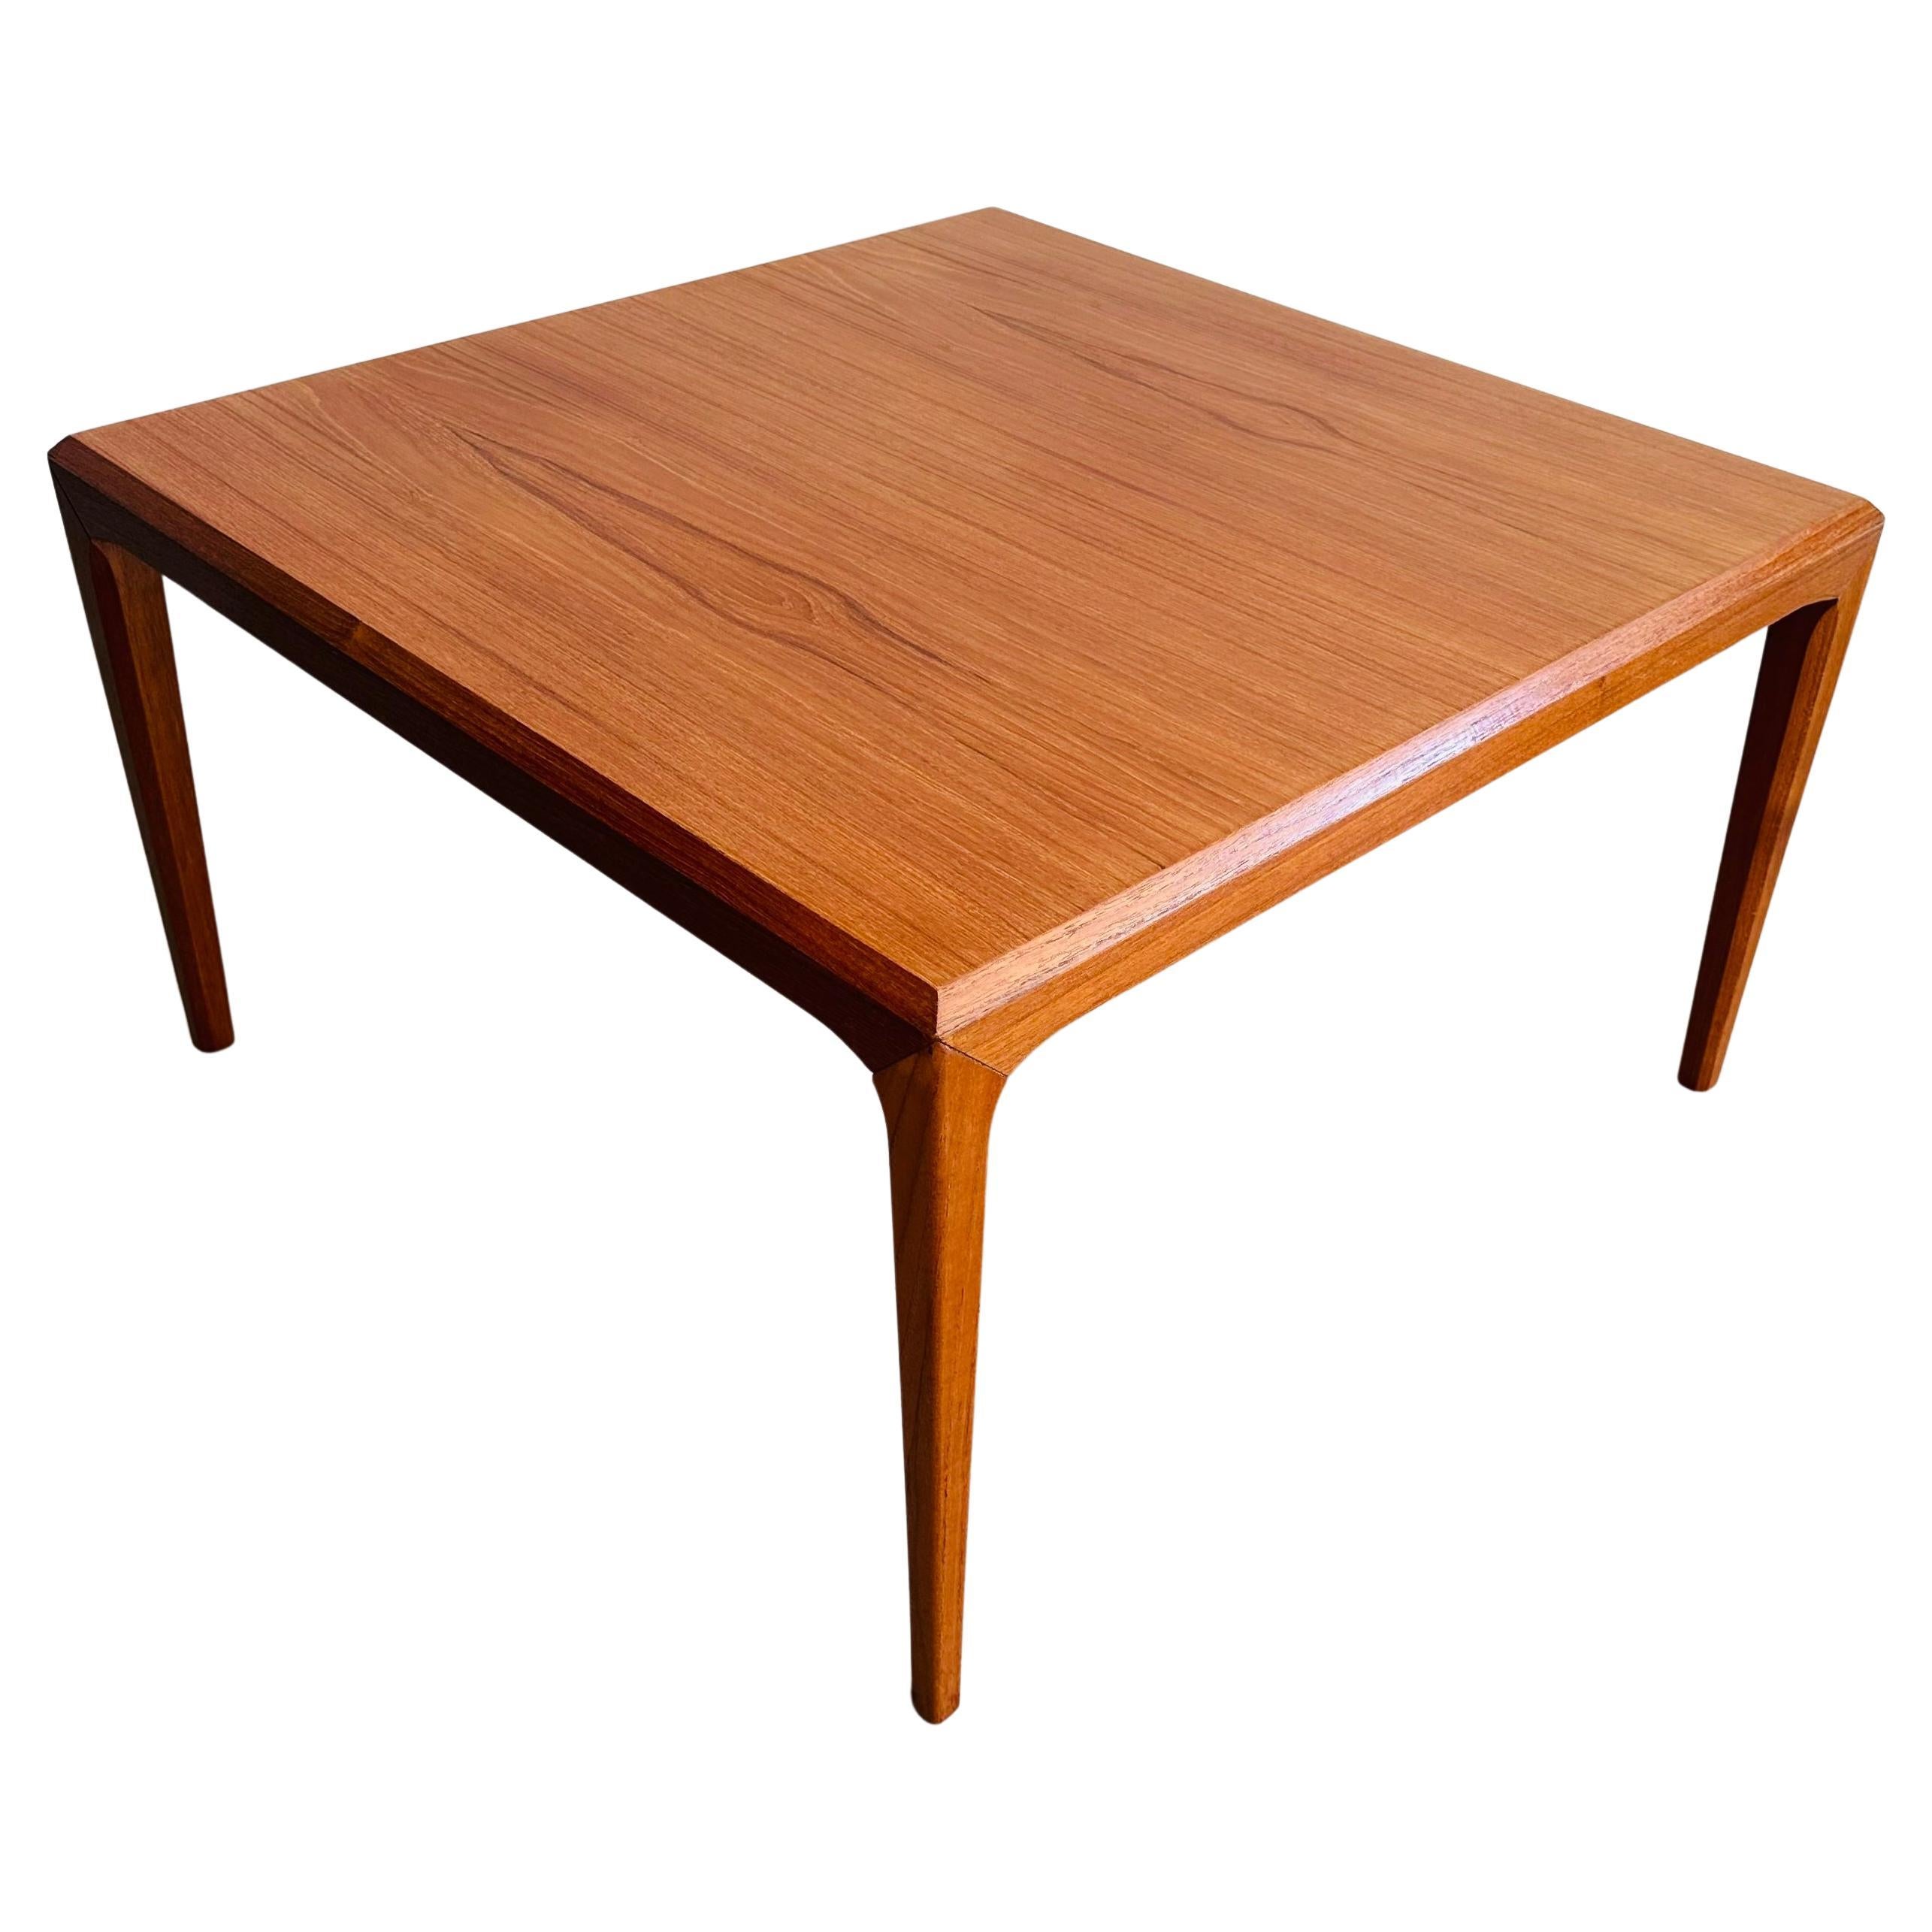 1960s Danish Silkeborg Furniture Square Teak Coffee Table by Johannes Andersen For Sale